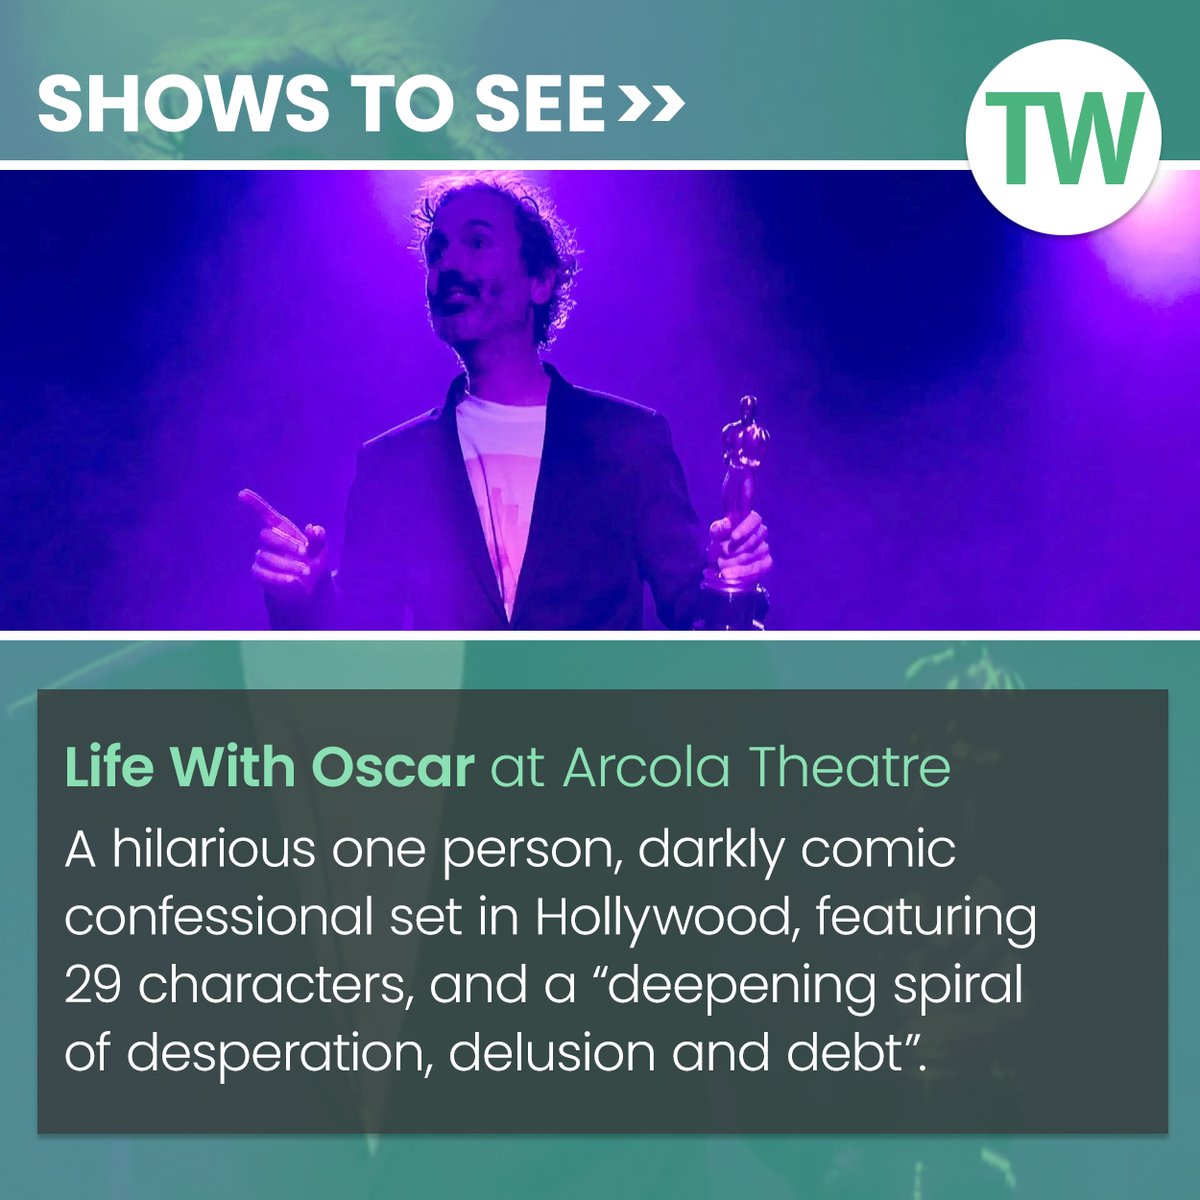 Among our recommended shows to see this week: ‘Life With Oscar’ by Nicholas Cohen at Arcola Theatre. Get more show tips here: bit.ly/3xeLRZ7 @arcolatheatre @OscarLifeShow